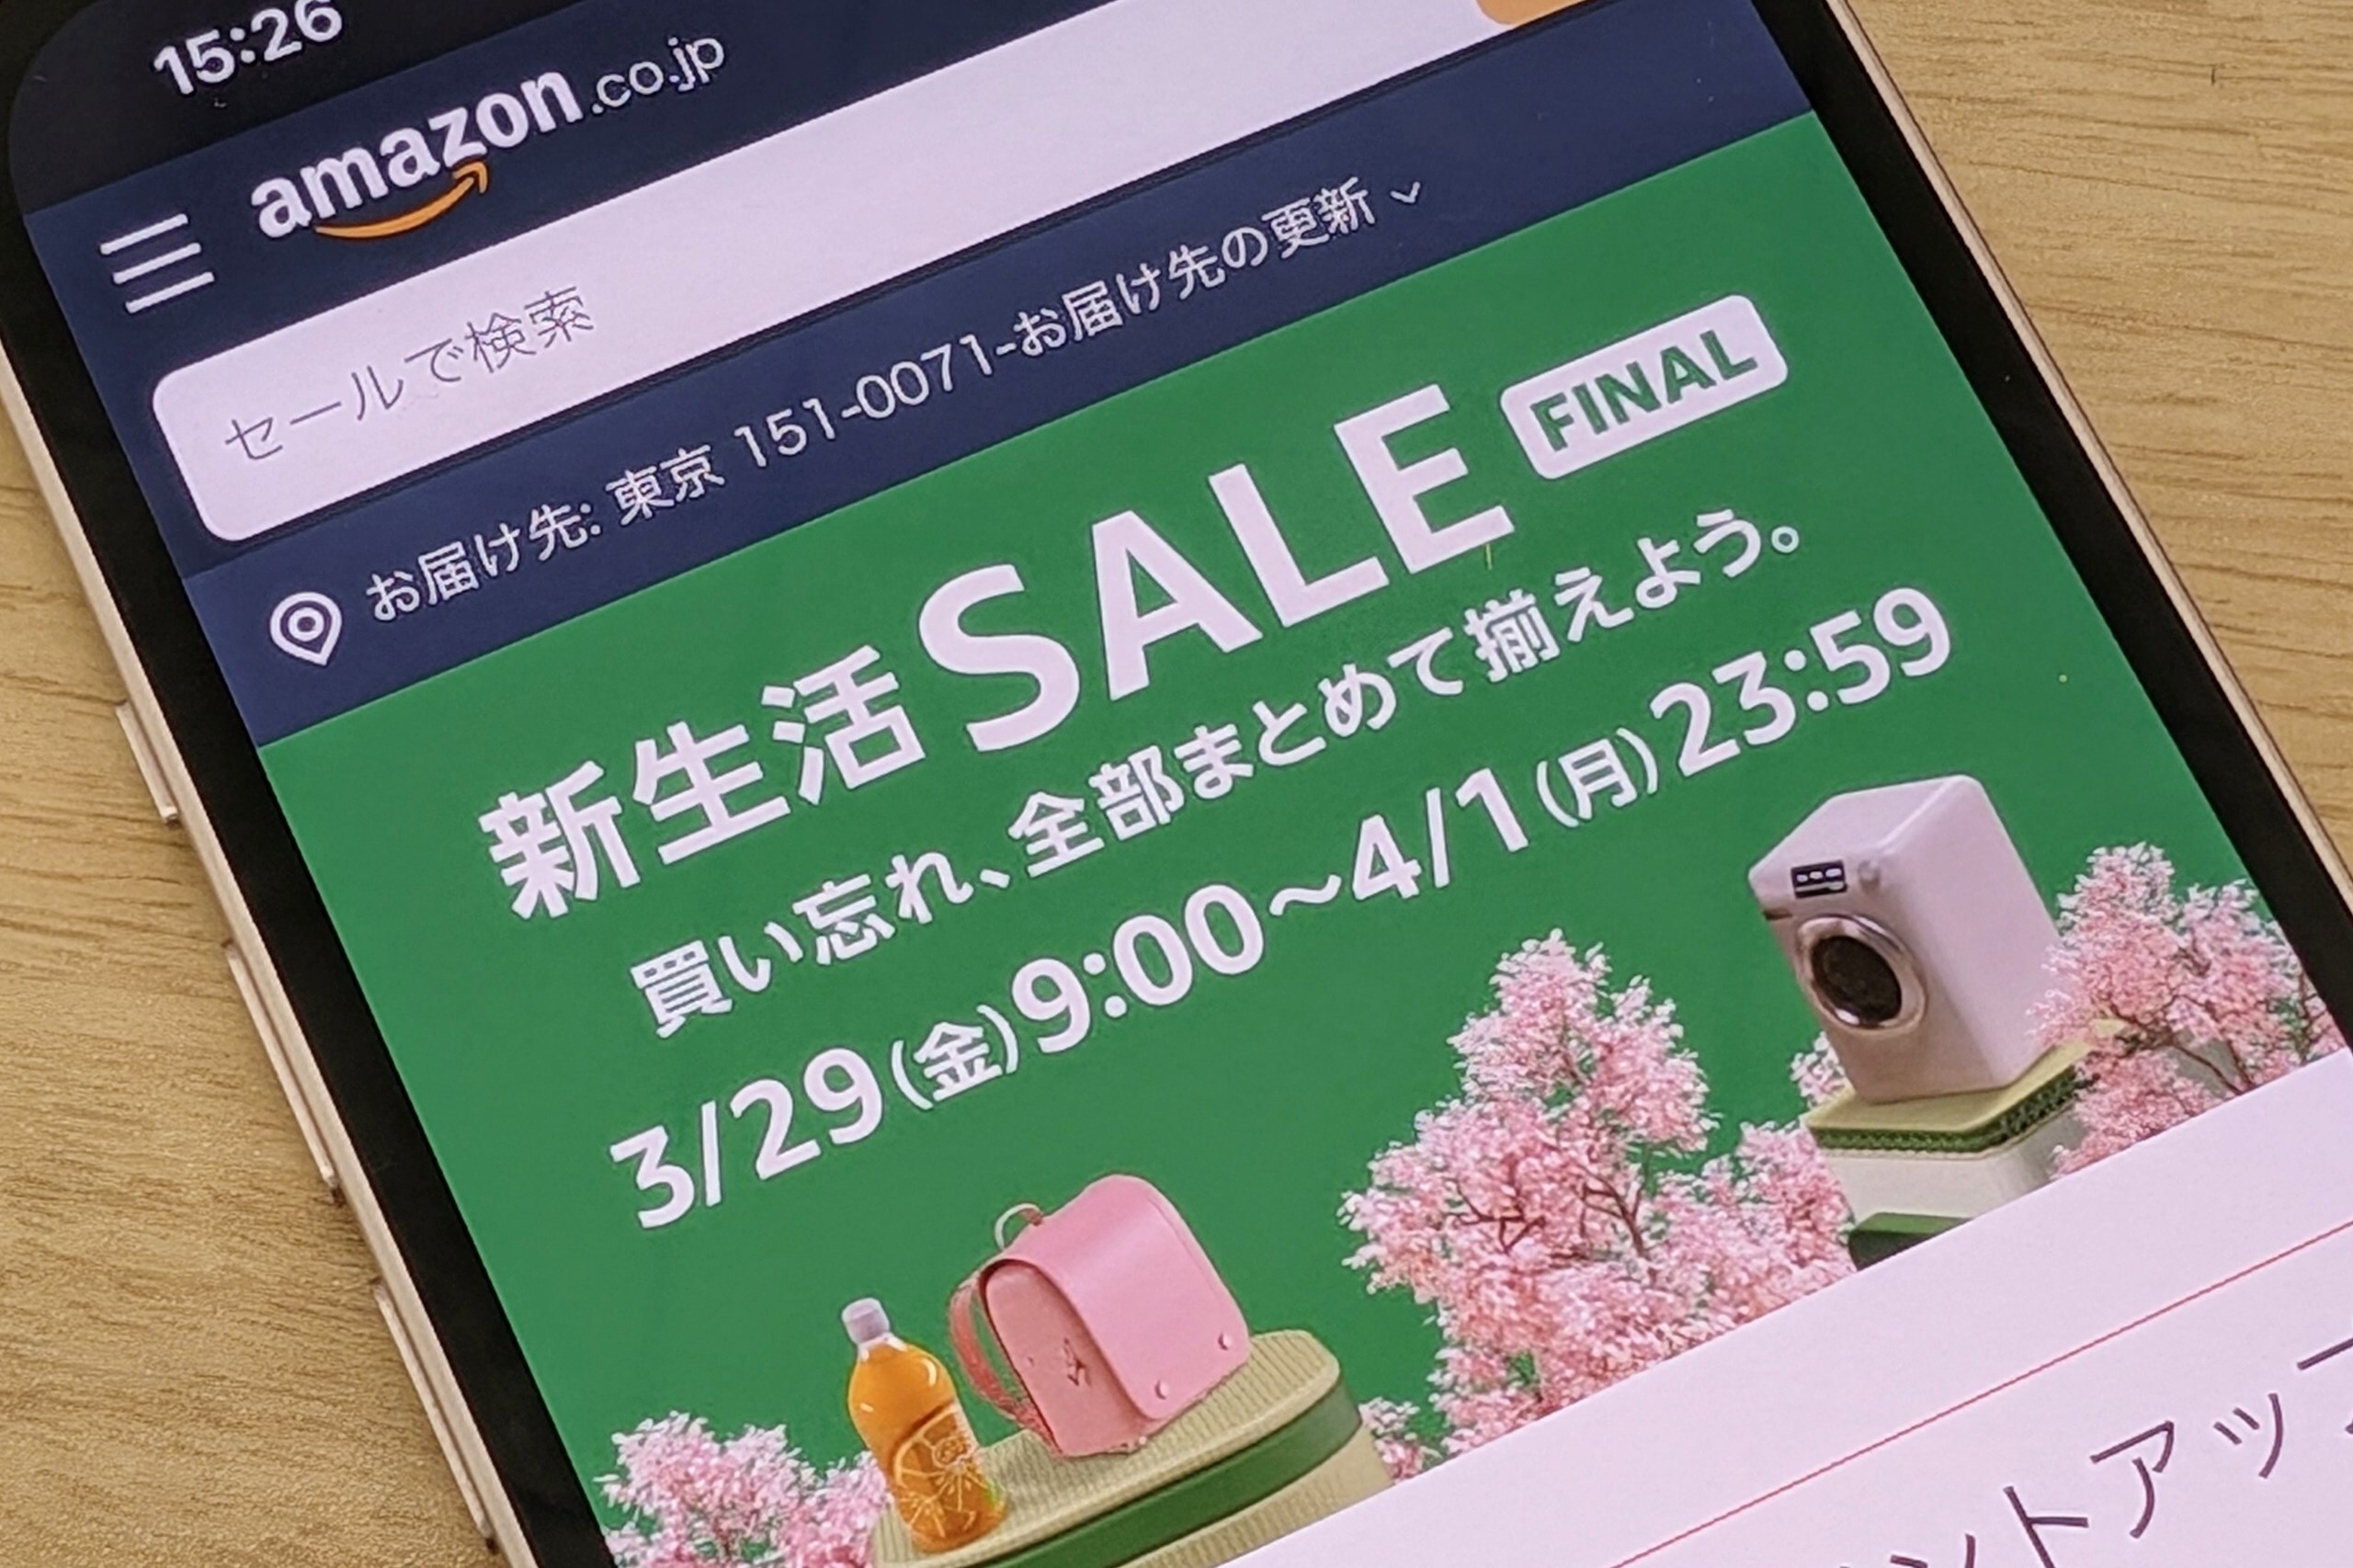 Amazonで「新生活SALE FINAL」、3月29日9時～ - ケータイ Watch